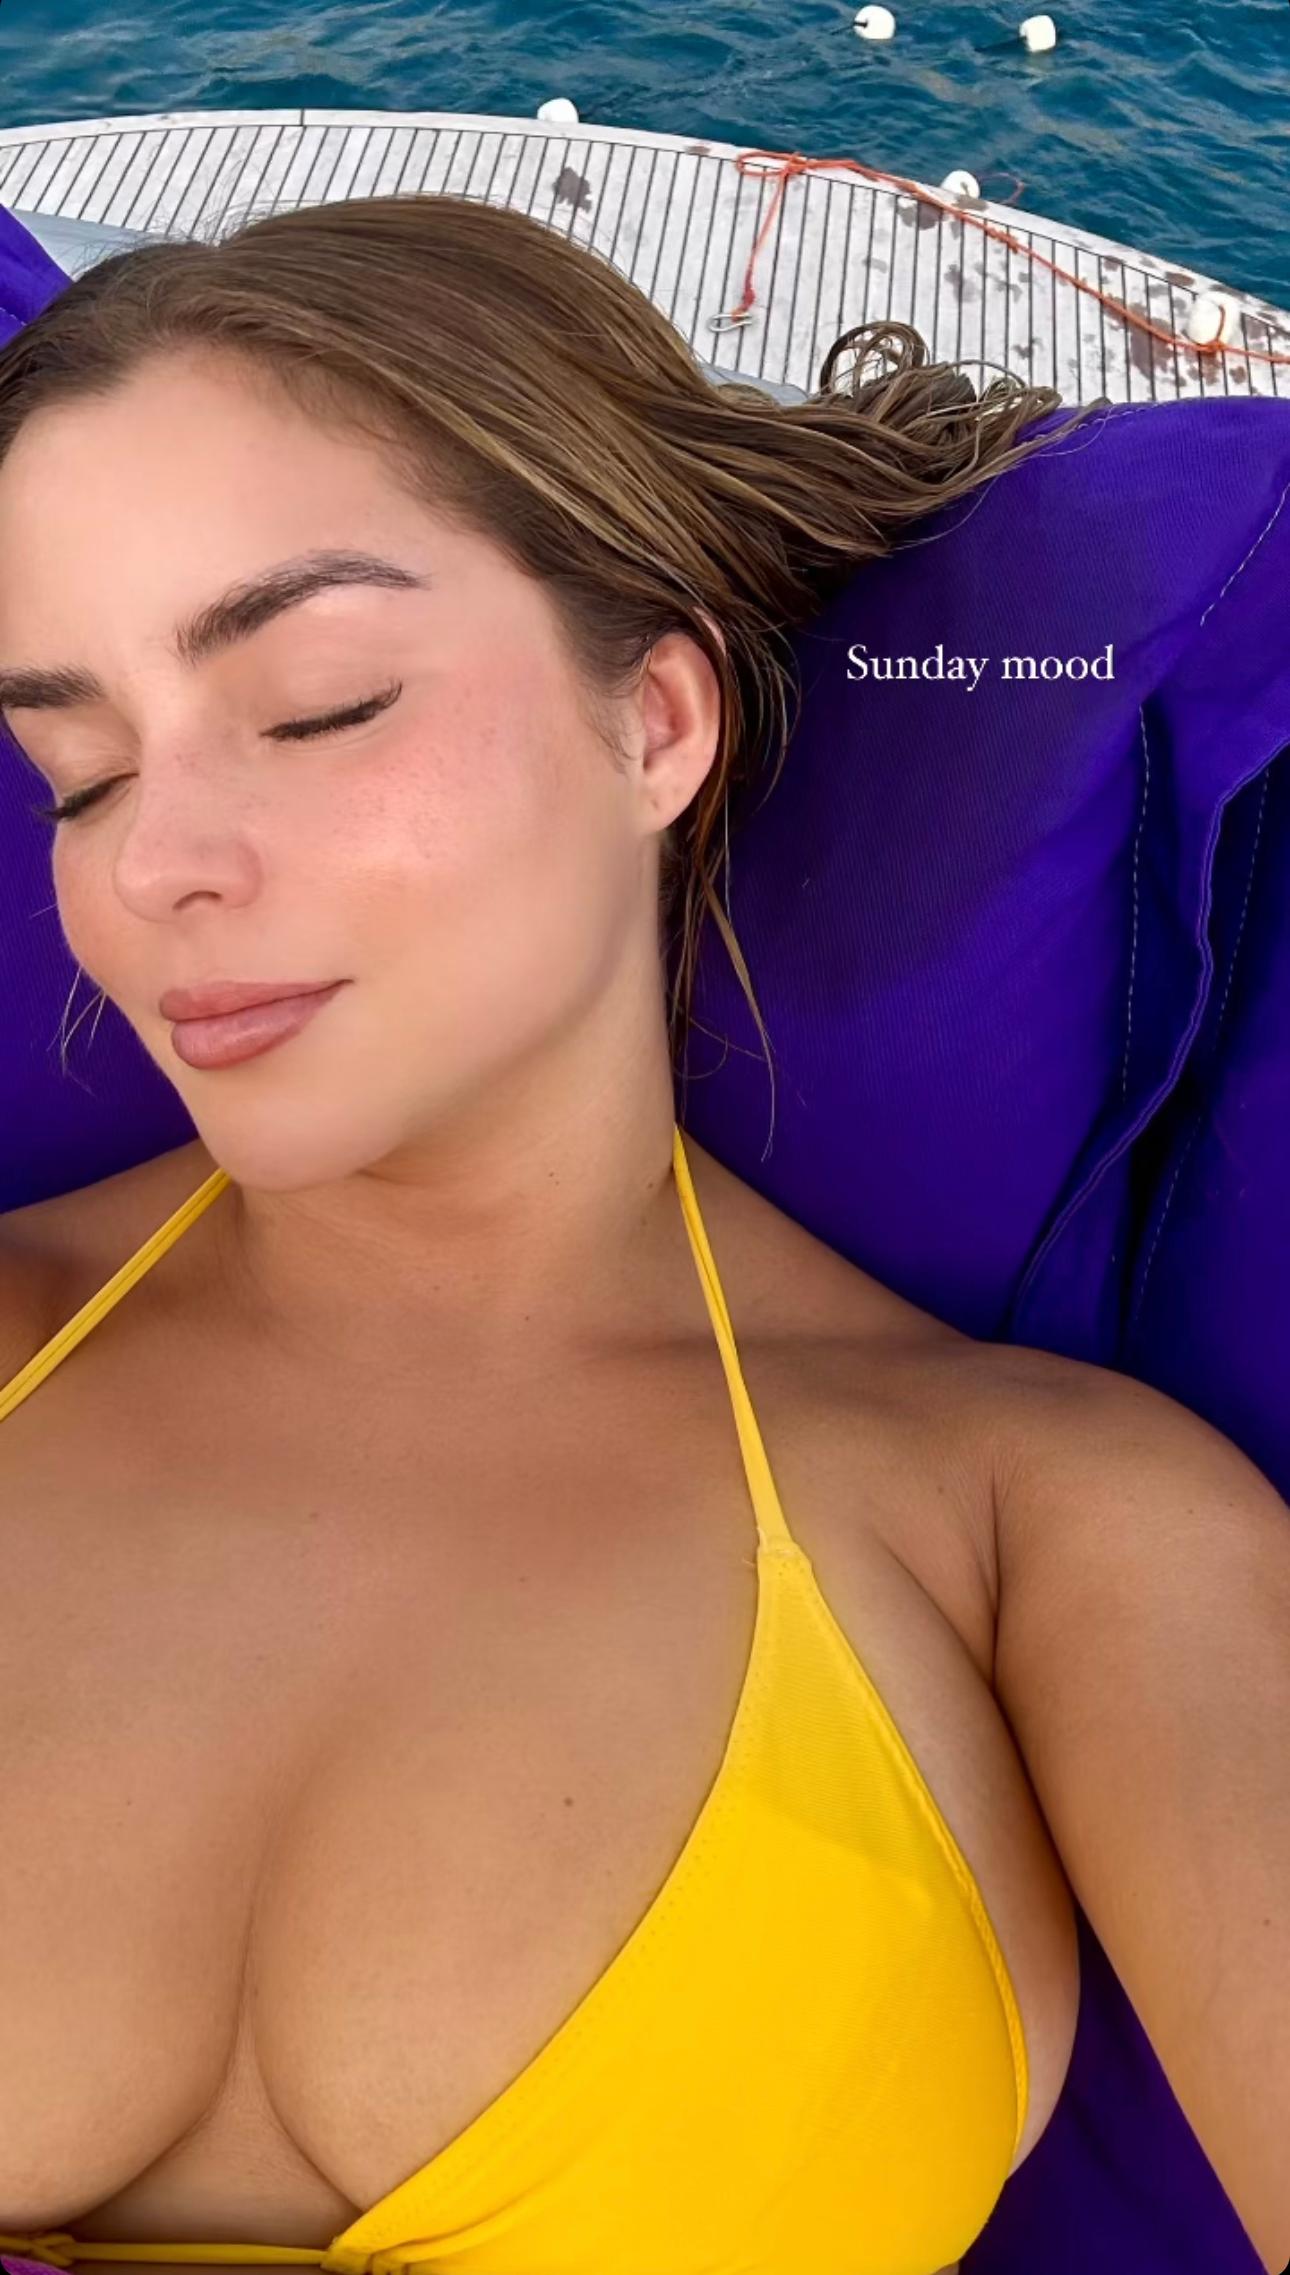 Demi Rose shows off her curves in tiny neon yellow bikini